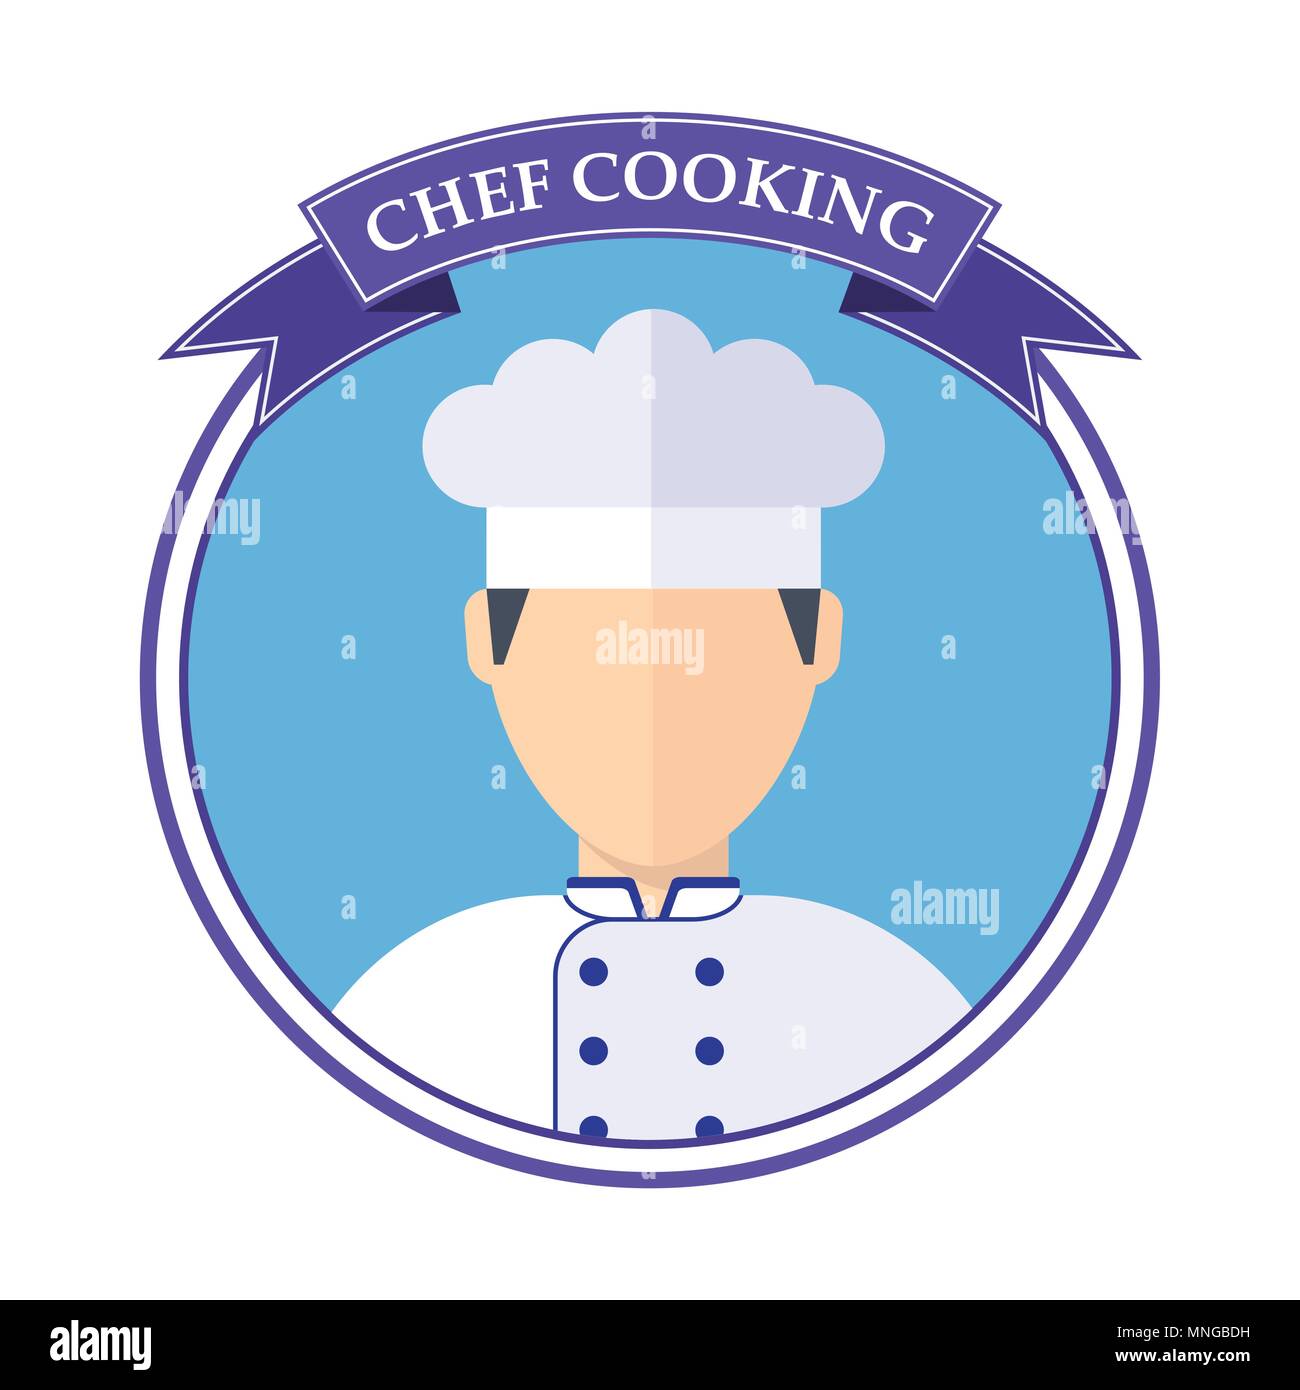 Chef Cooking Logo Stock Vector Art Illustration Vector Image